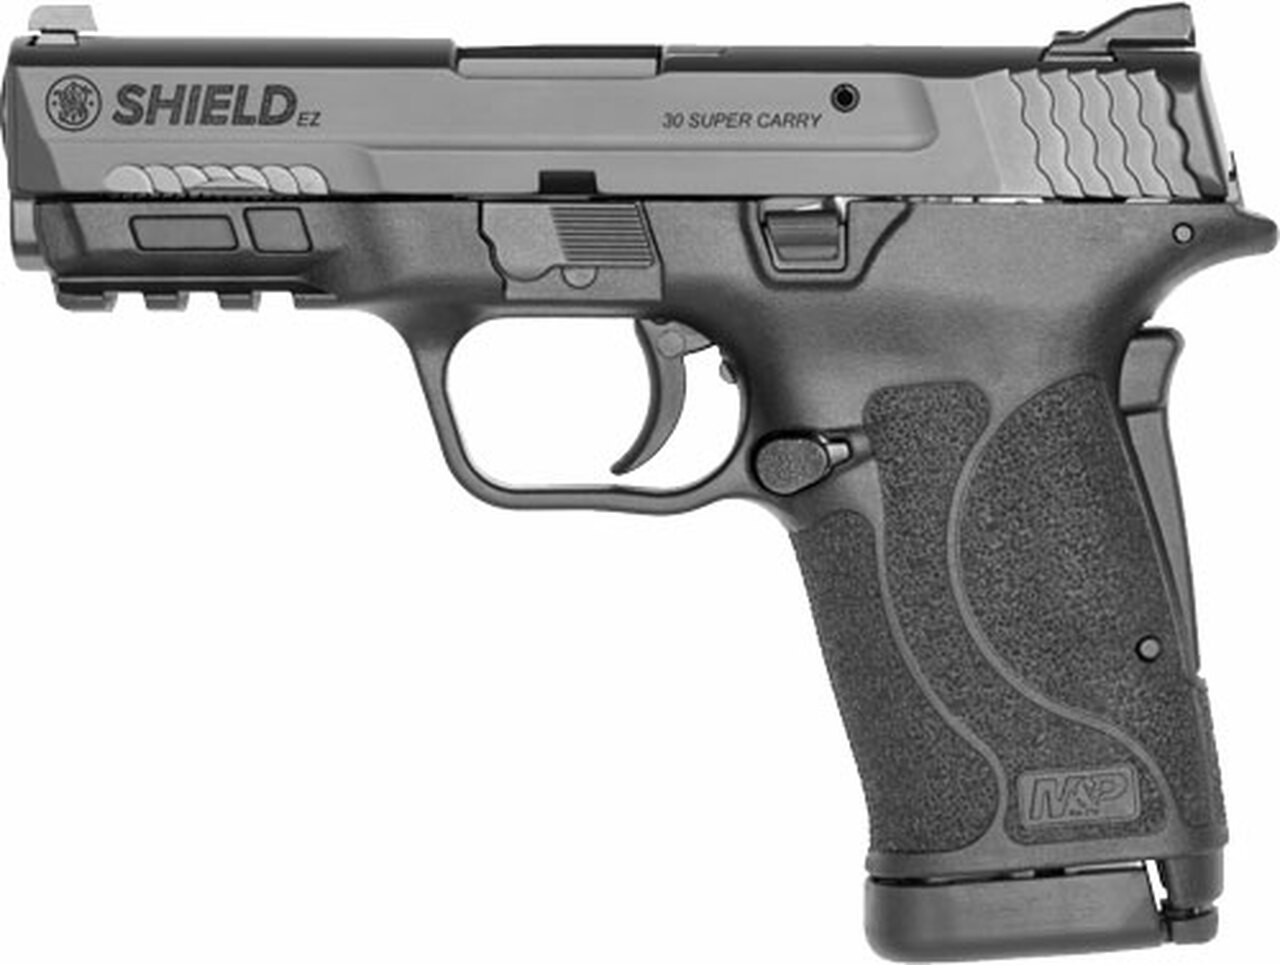 30 Super Carry Shield EZ from Smith & Wesson.